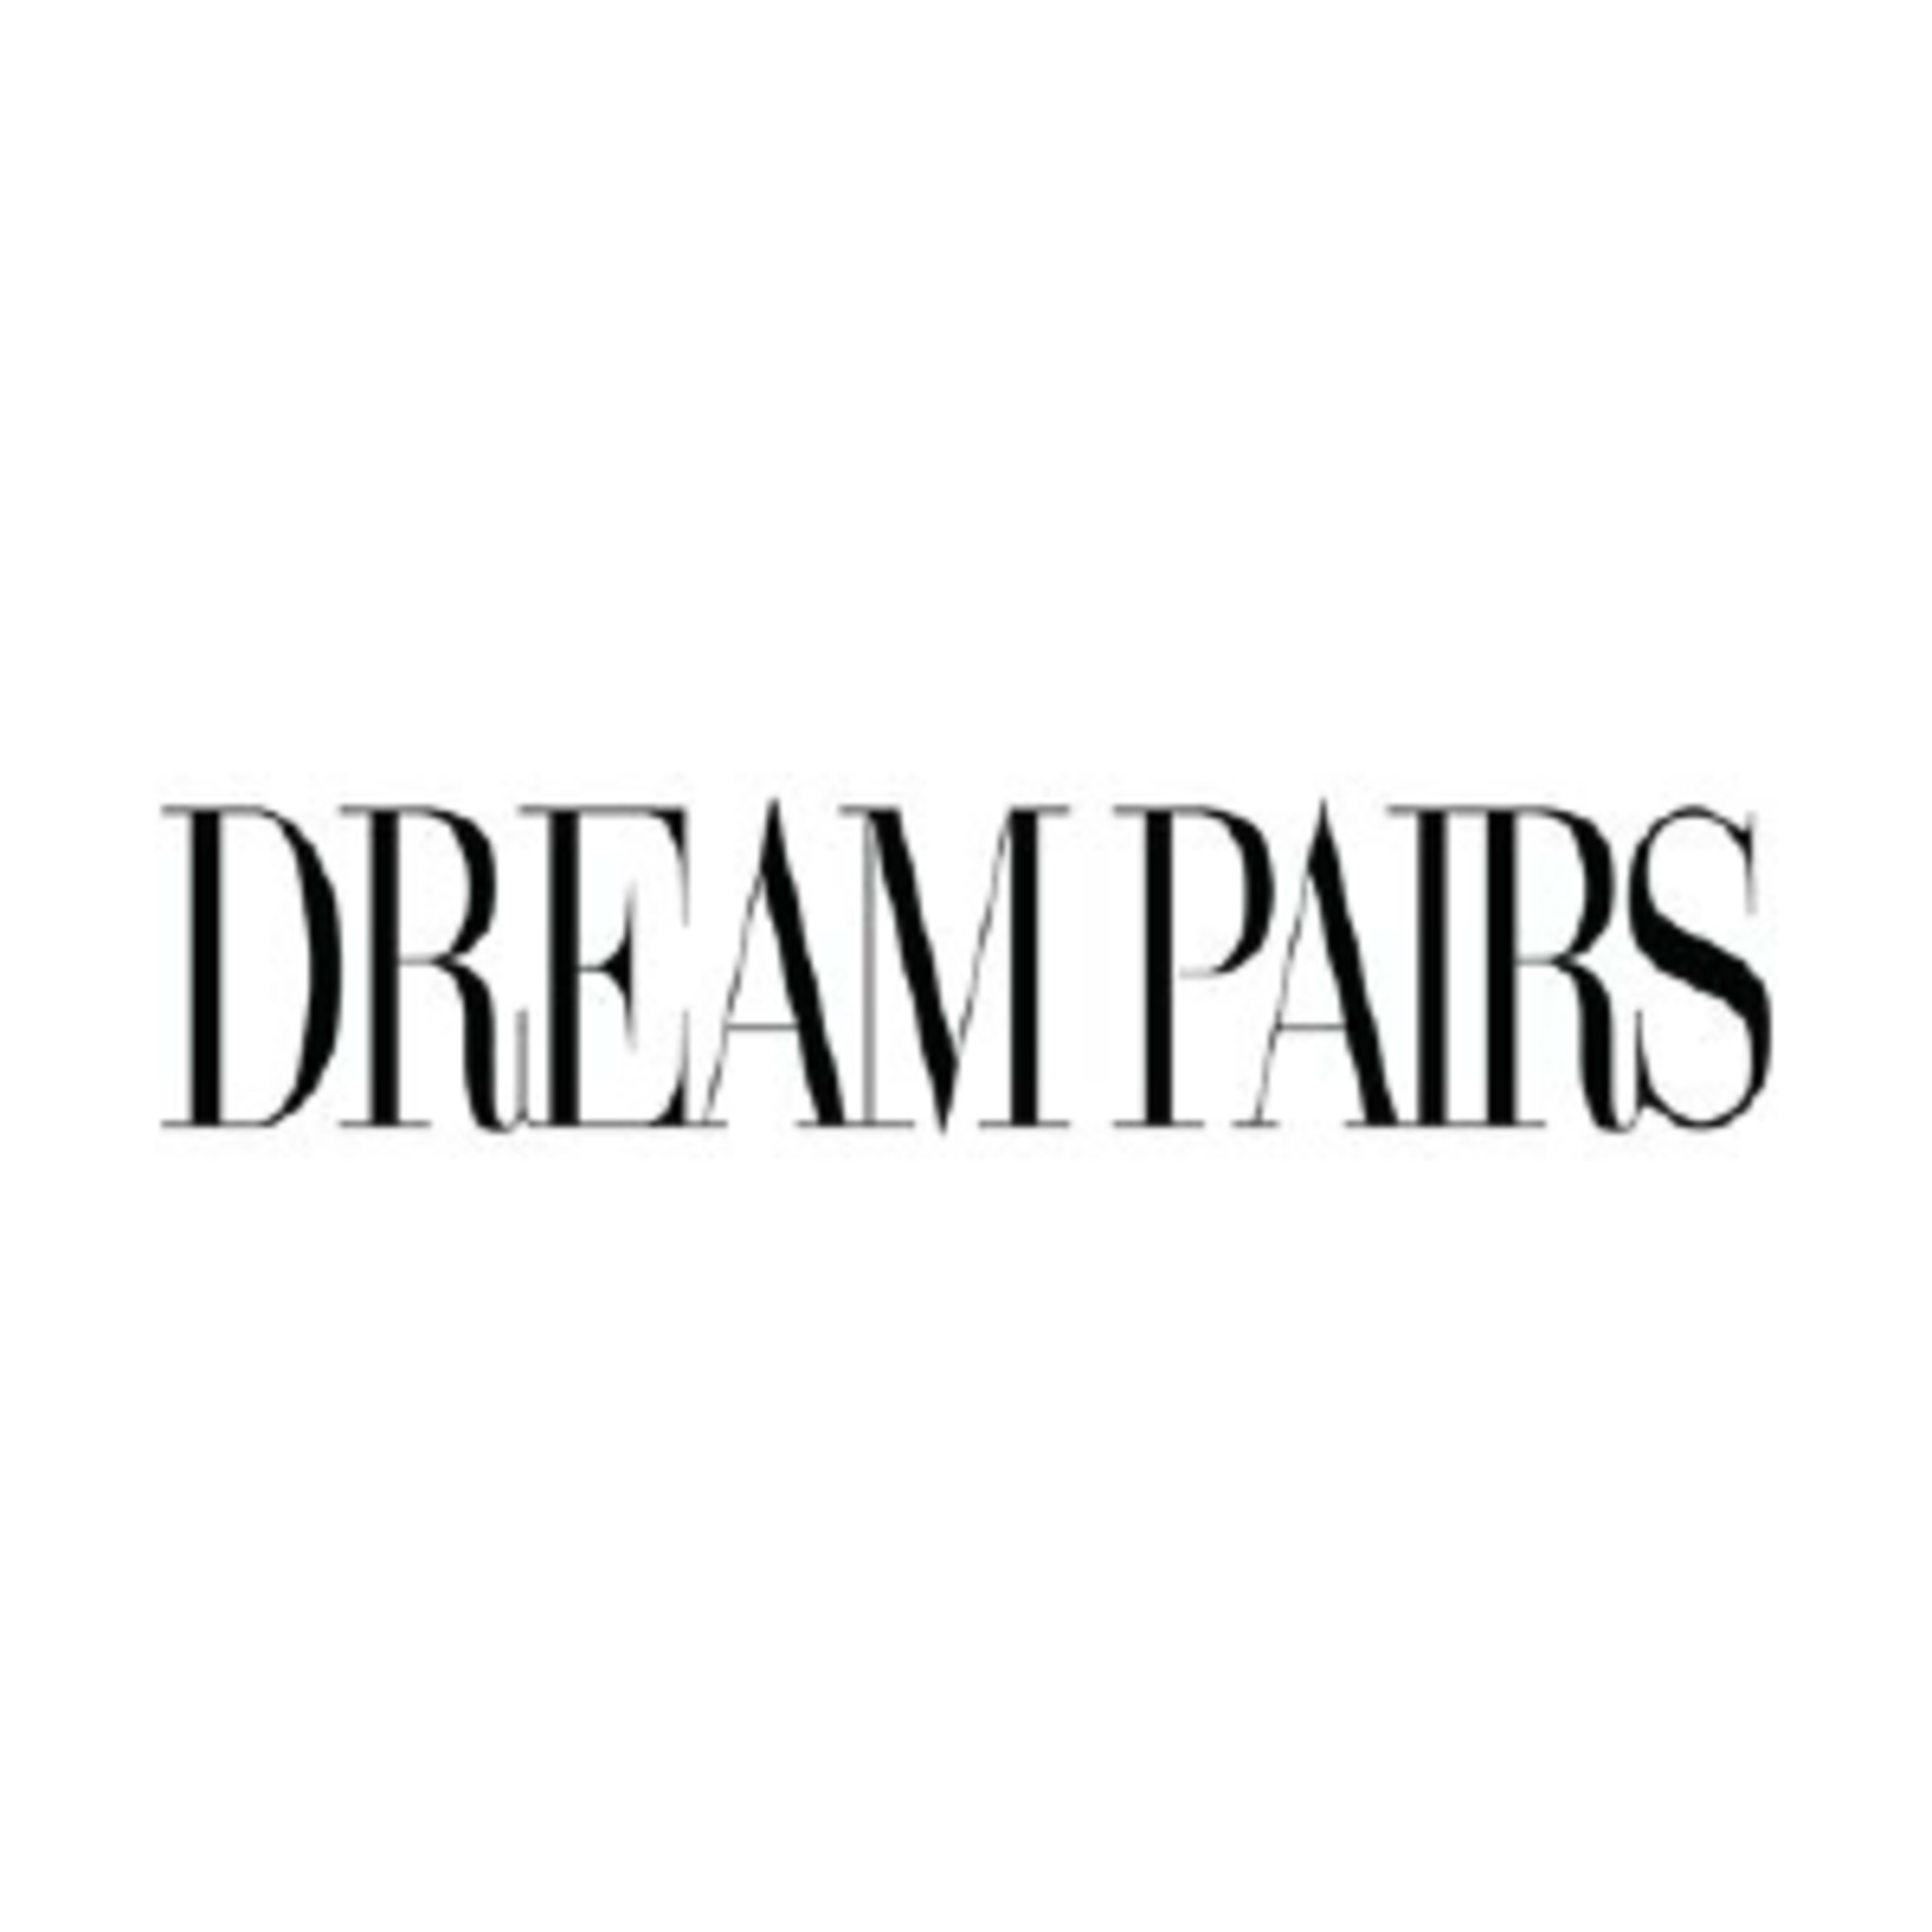 Dream Pairs, Bruno Marc, & Nortiv 8 Shoes (Top Glory Trading Group Inc) Code